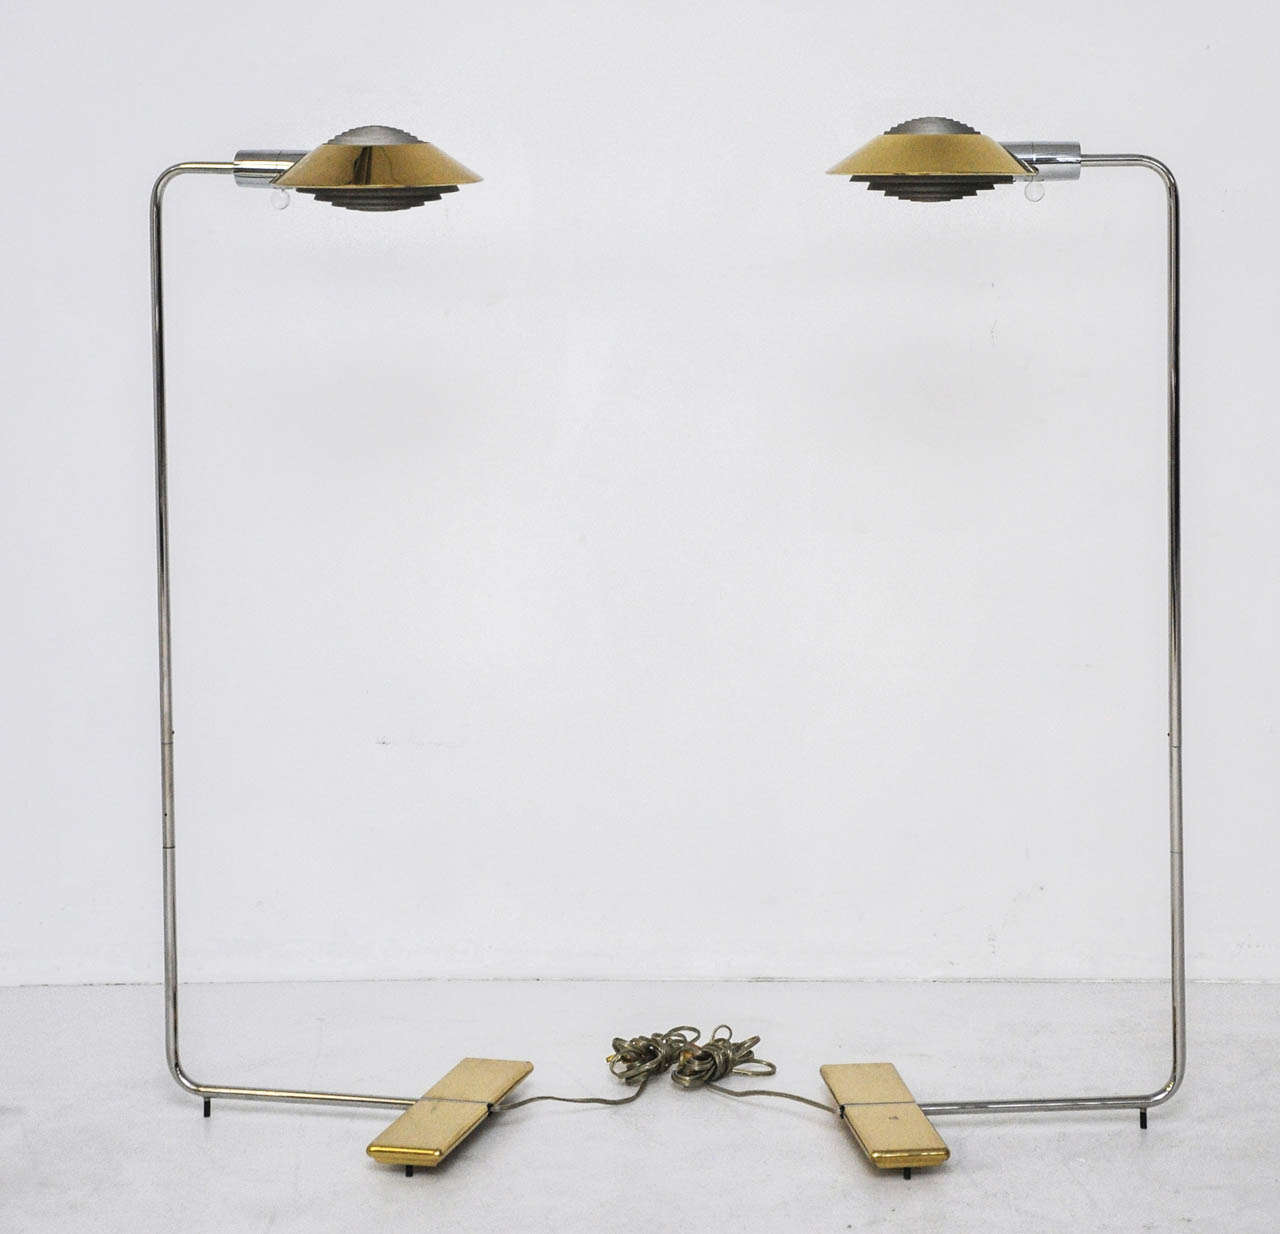 Pair of Cedric Hartman lamps in 2-tone brass and stainless steel.  Lamps are adjustable in height with swivel shades.